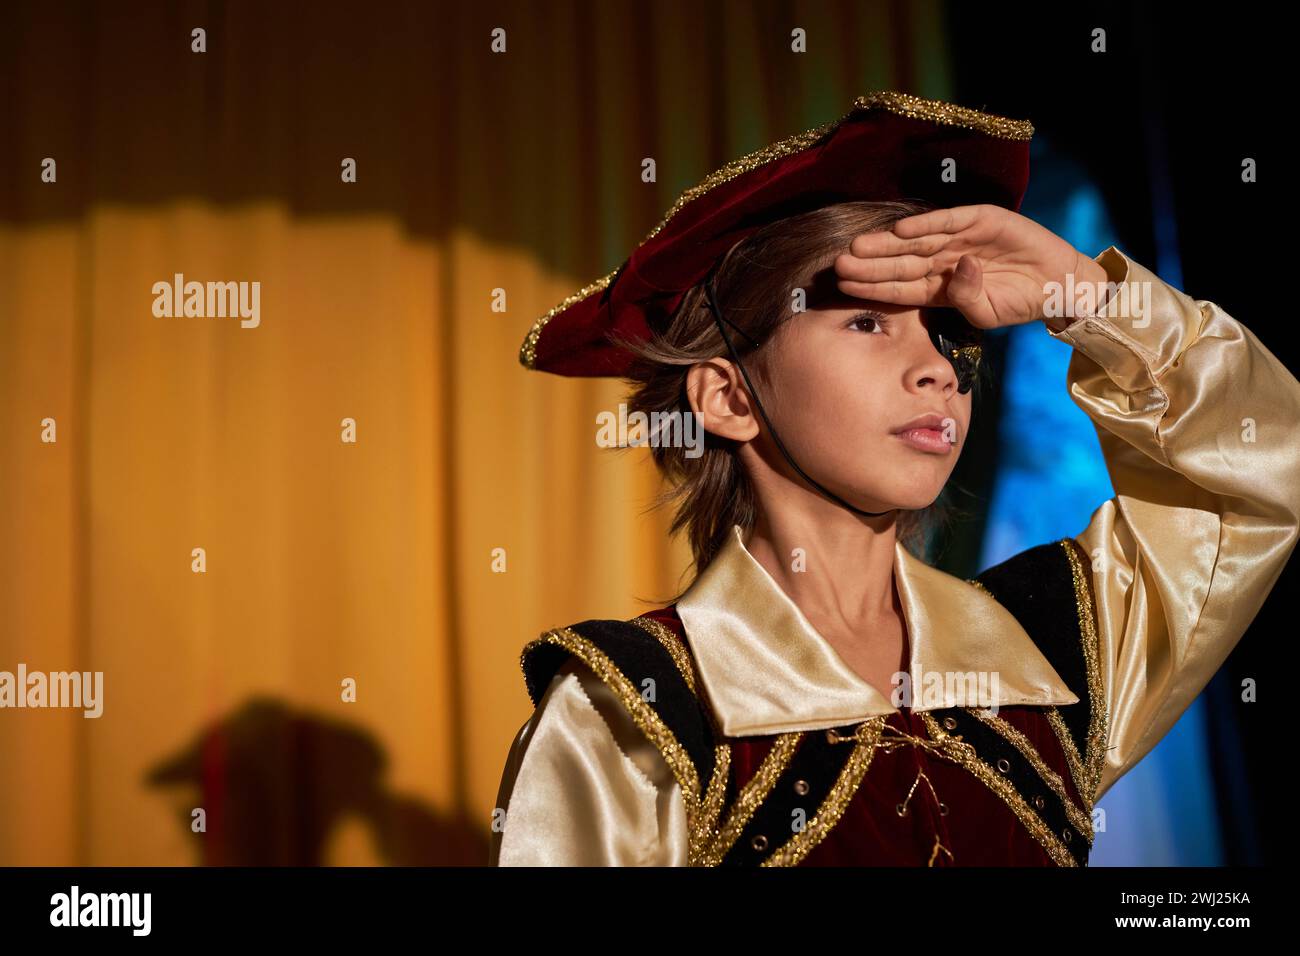 Waist up portrait of boy wearing pirate costume performing on stage in spotlight and talking to audience, copy space Stock Photo